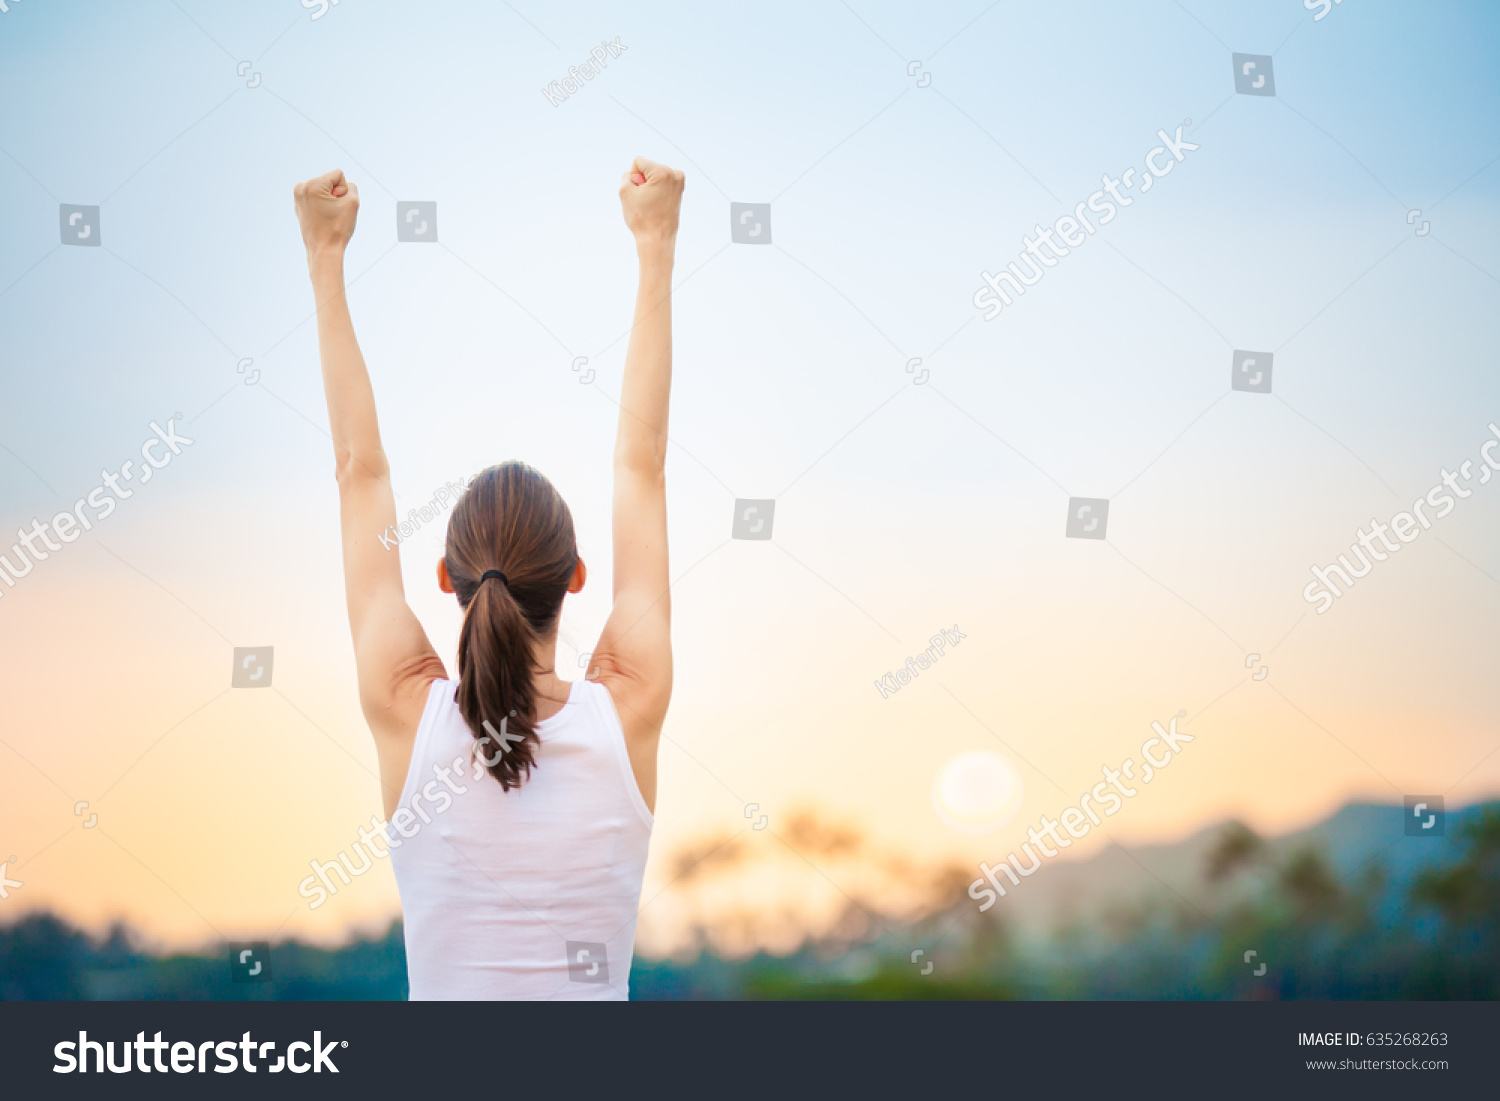 Success and life goals concept. Strong and confident woman with arms in the air.  #635268263